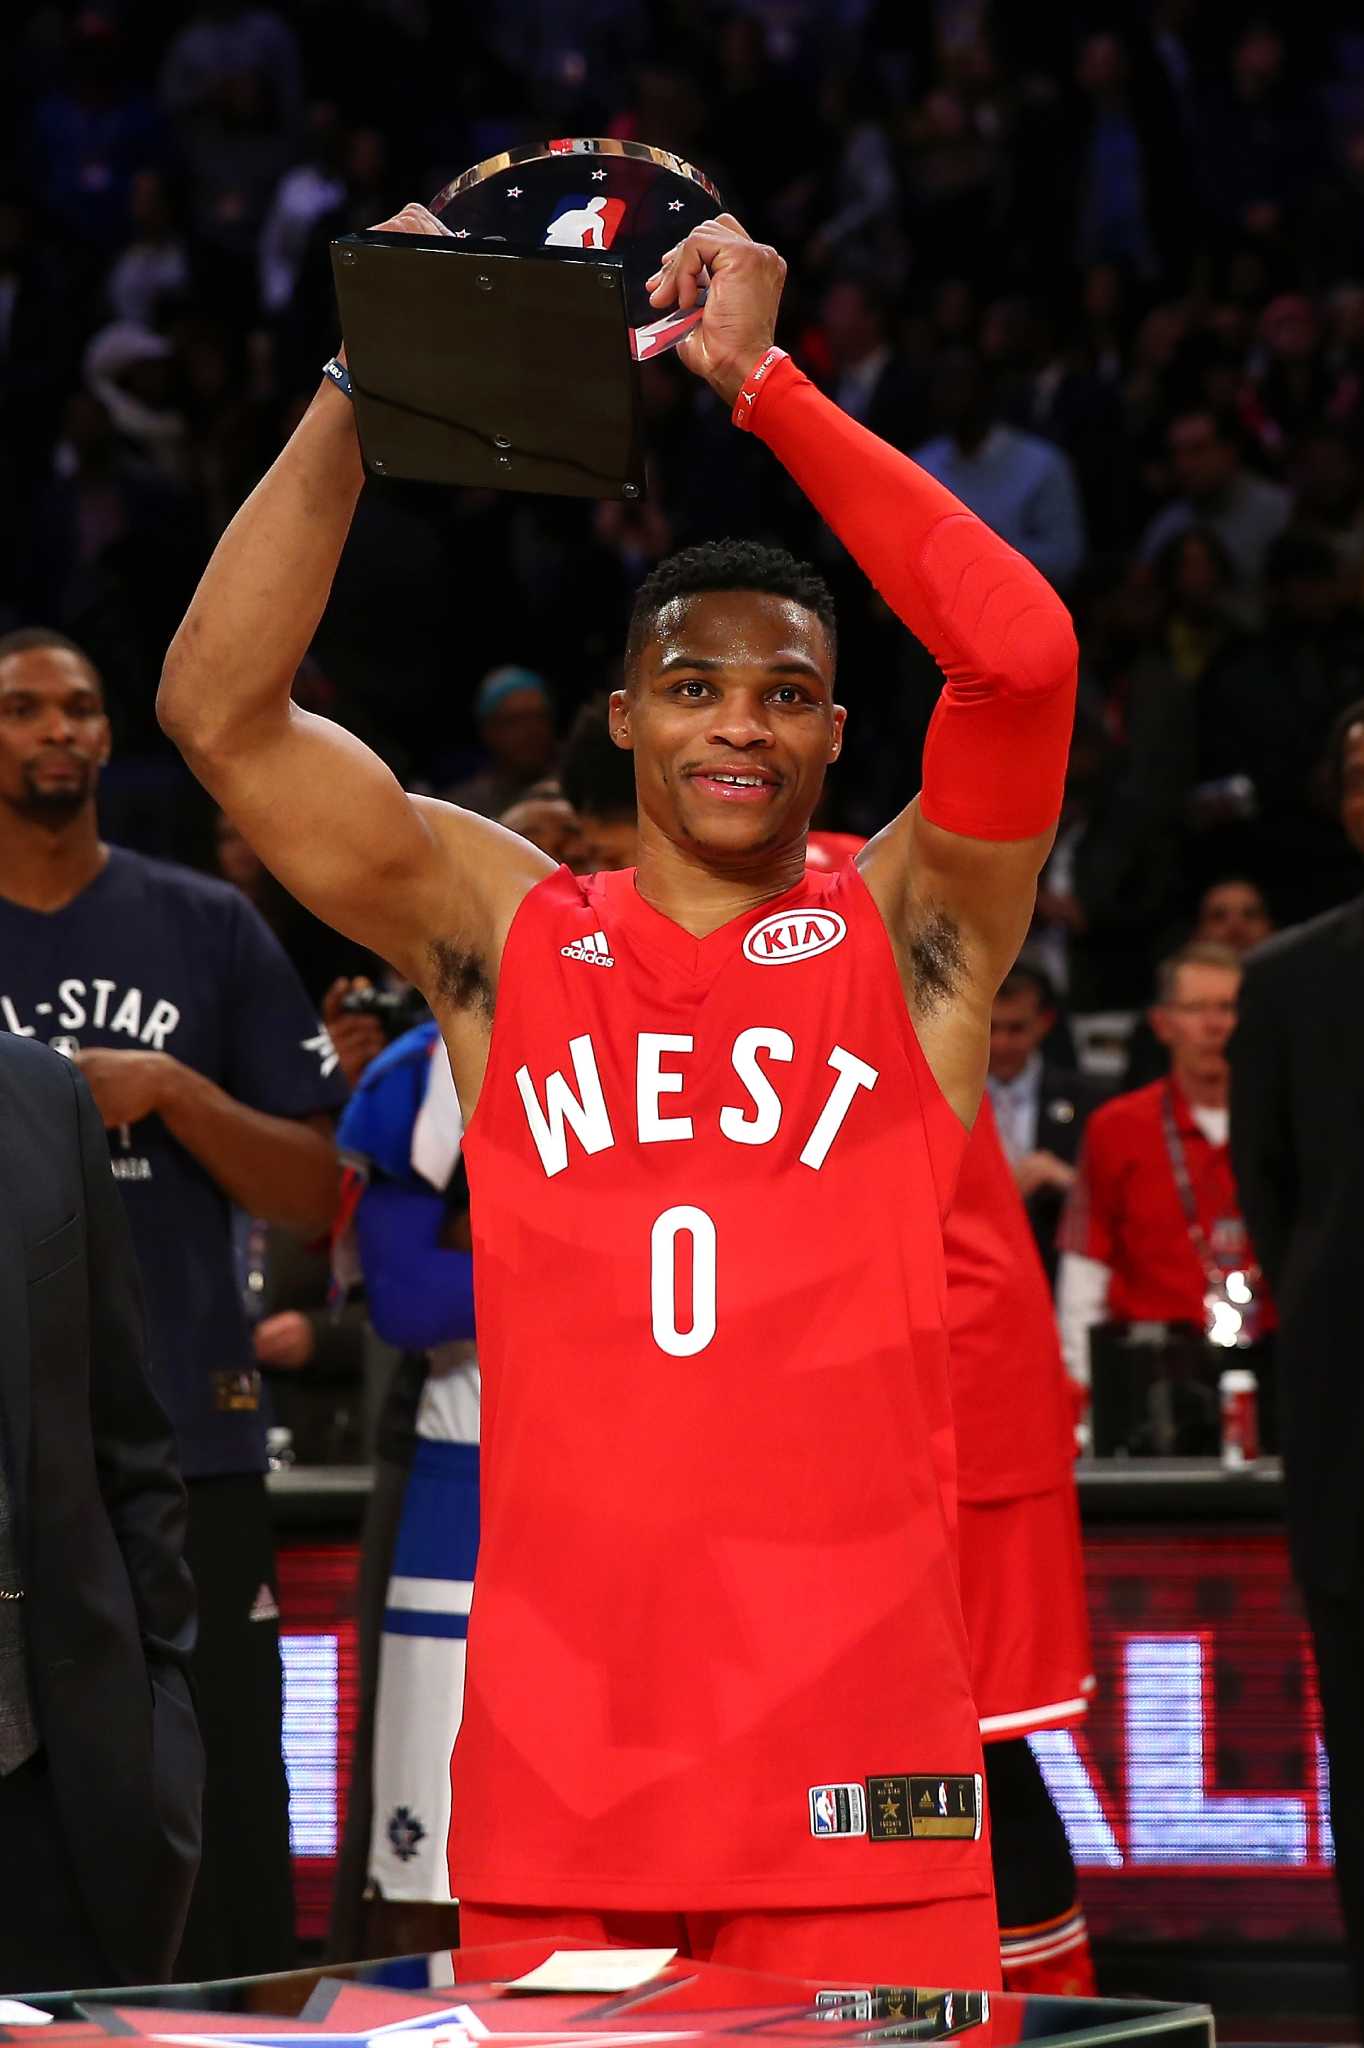 russell westbrook all star